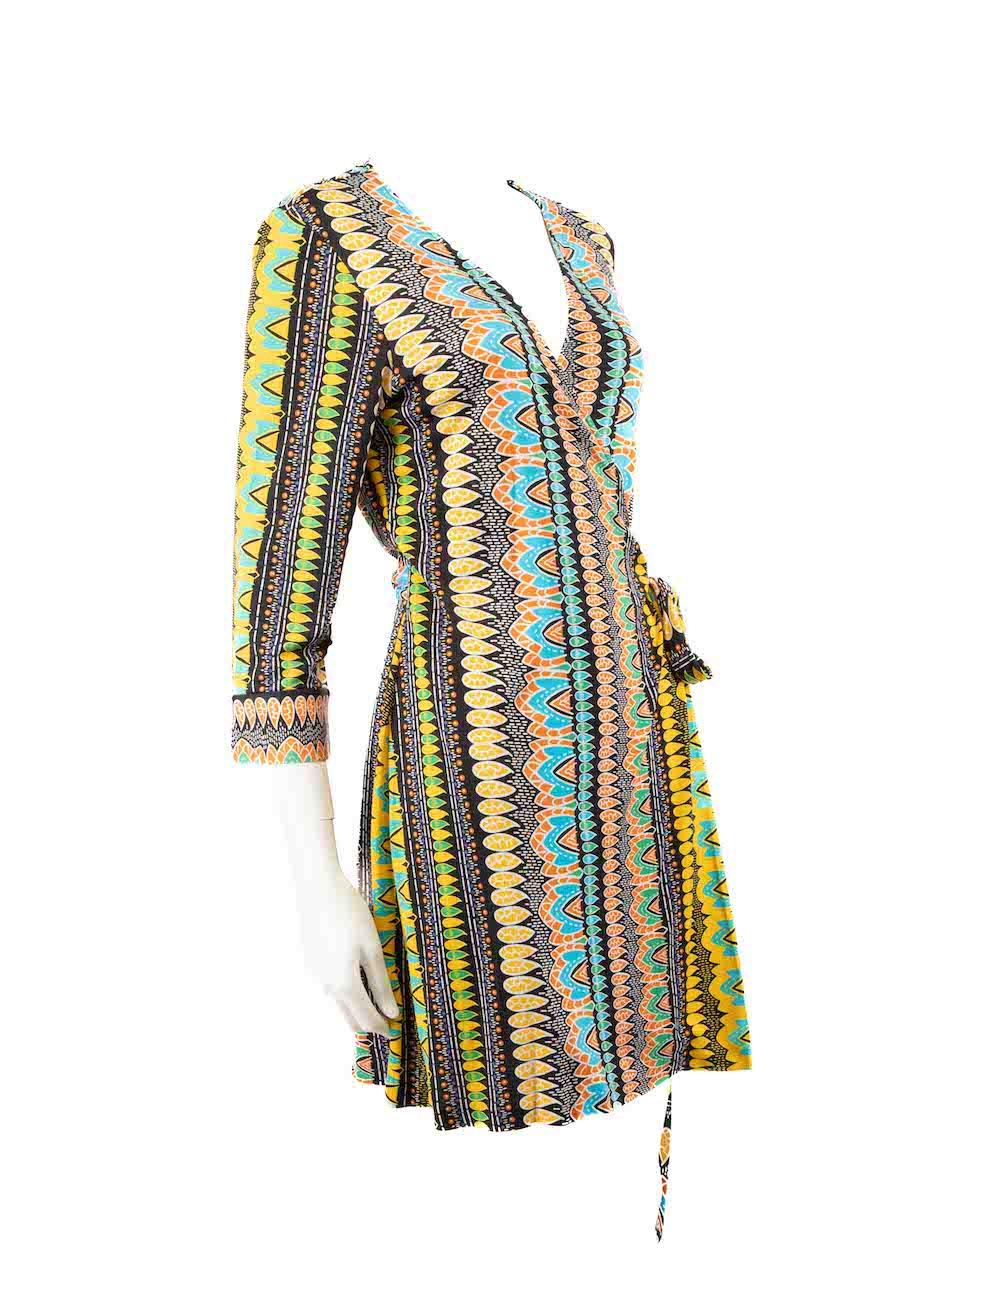 CONDITION is Very good. Hardly any visible wear to dress is evident on this used Diane Von Furstenberg designer resale item.
 
 
 
 Details
 
 
 Multicolour
 
 Silk
 
 Wrap dress
 
 Mini
 
 V-neck
 
 Tie fastening
 
 Long sleeves
 
 
 
 
 
 Made in